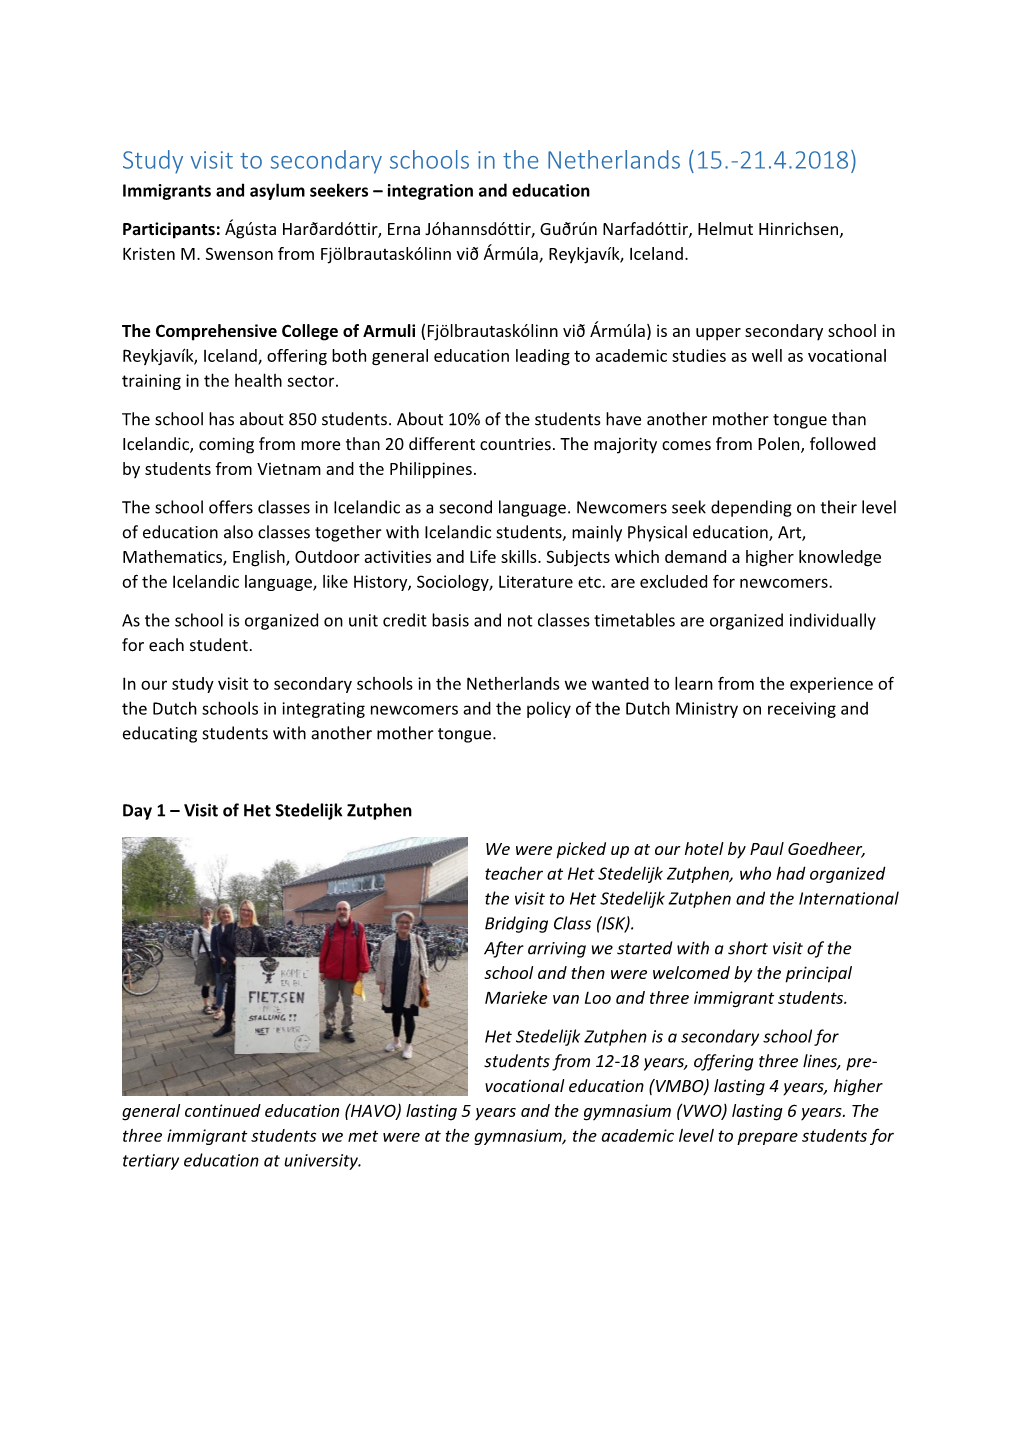 Study Visit to Secondary Schools in the Netherlands (15.-21.4.2018) Immigrants and Asylum Seekers – Integration and Education